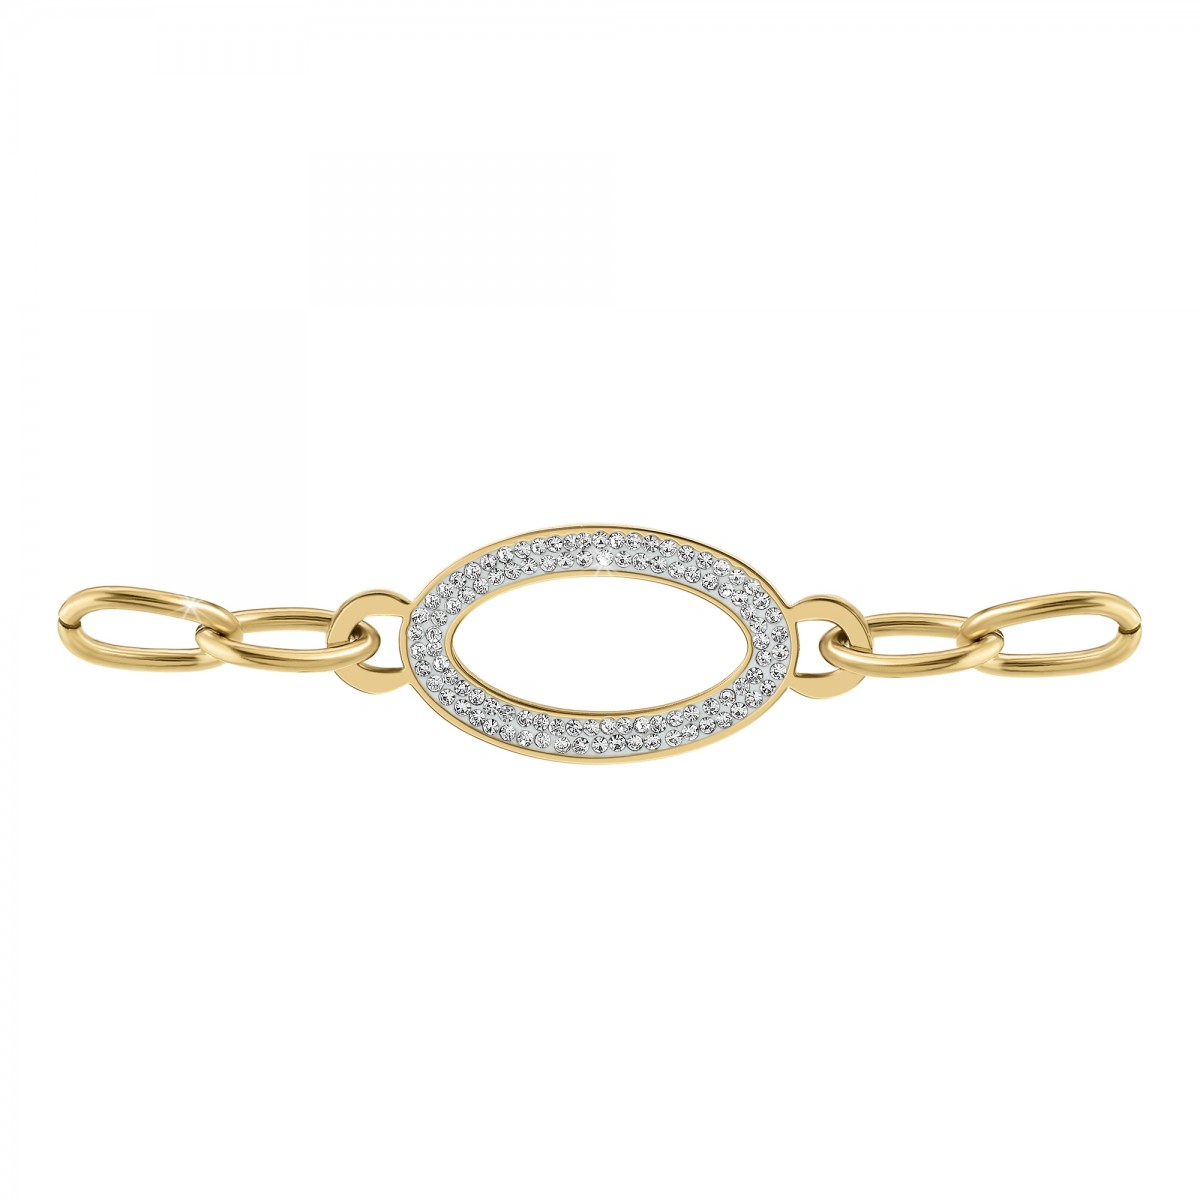 Buy Marque Small Hoop Chain Bracelet Made in 18K Gold Vermeil On Sterling  Silver At Sacetcom